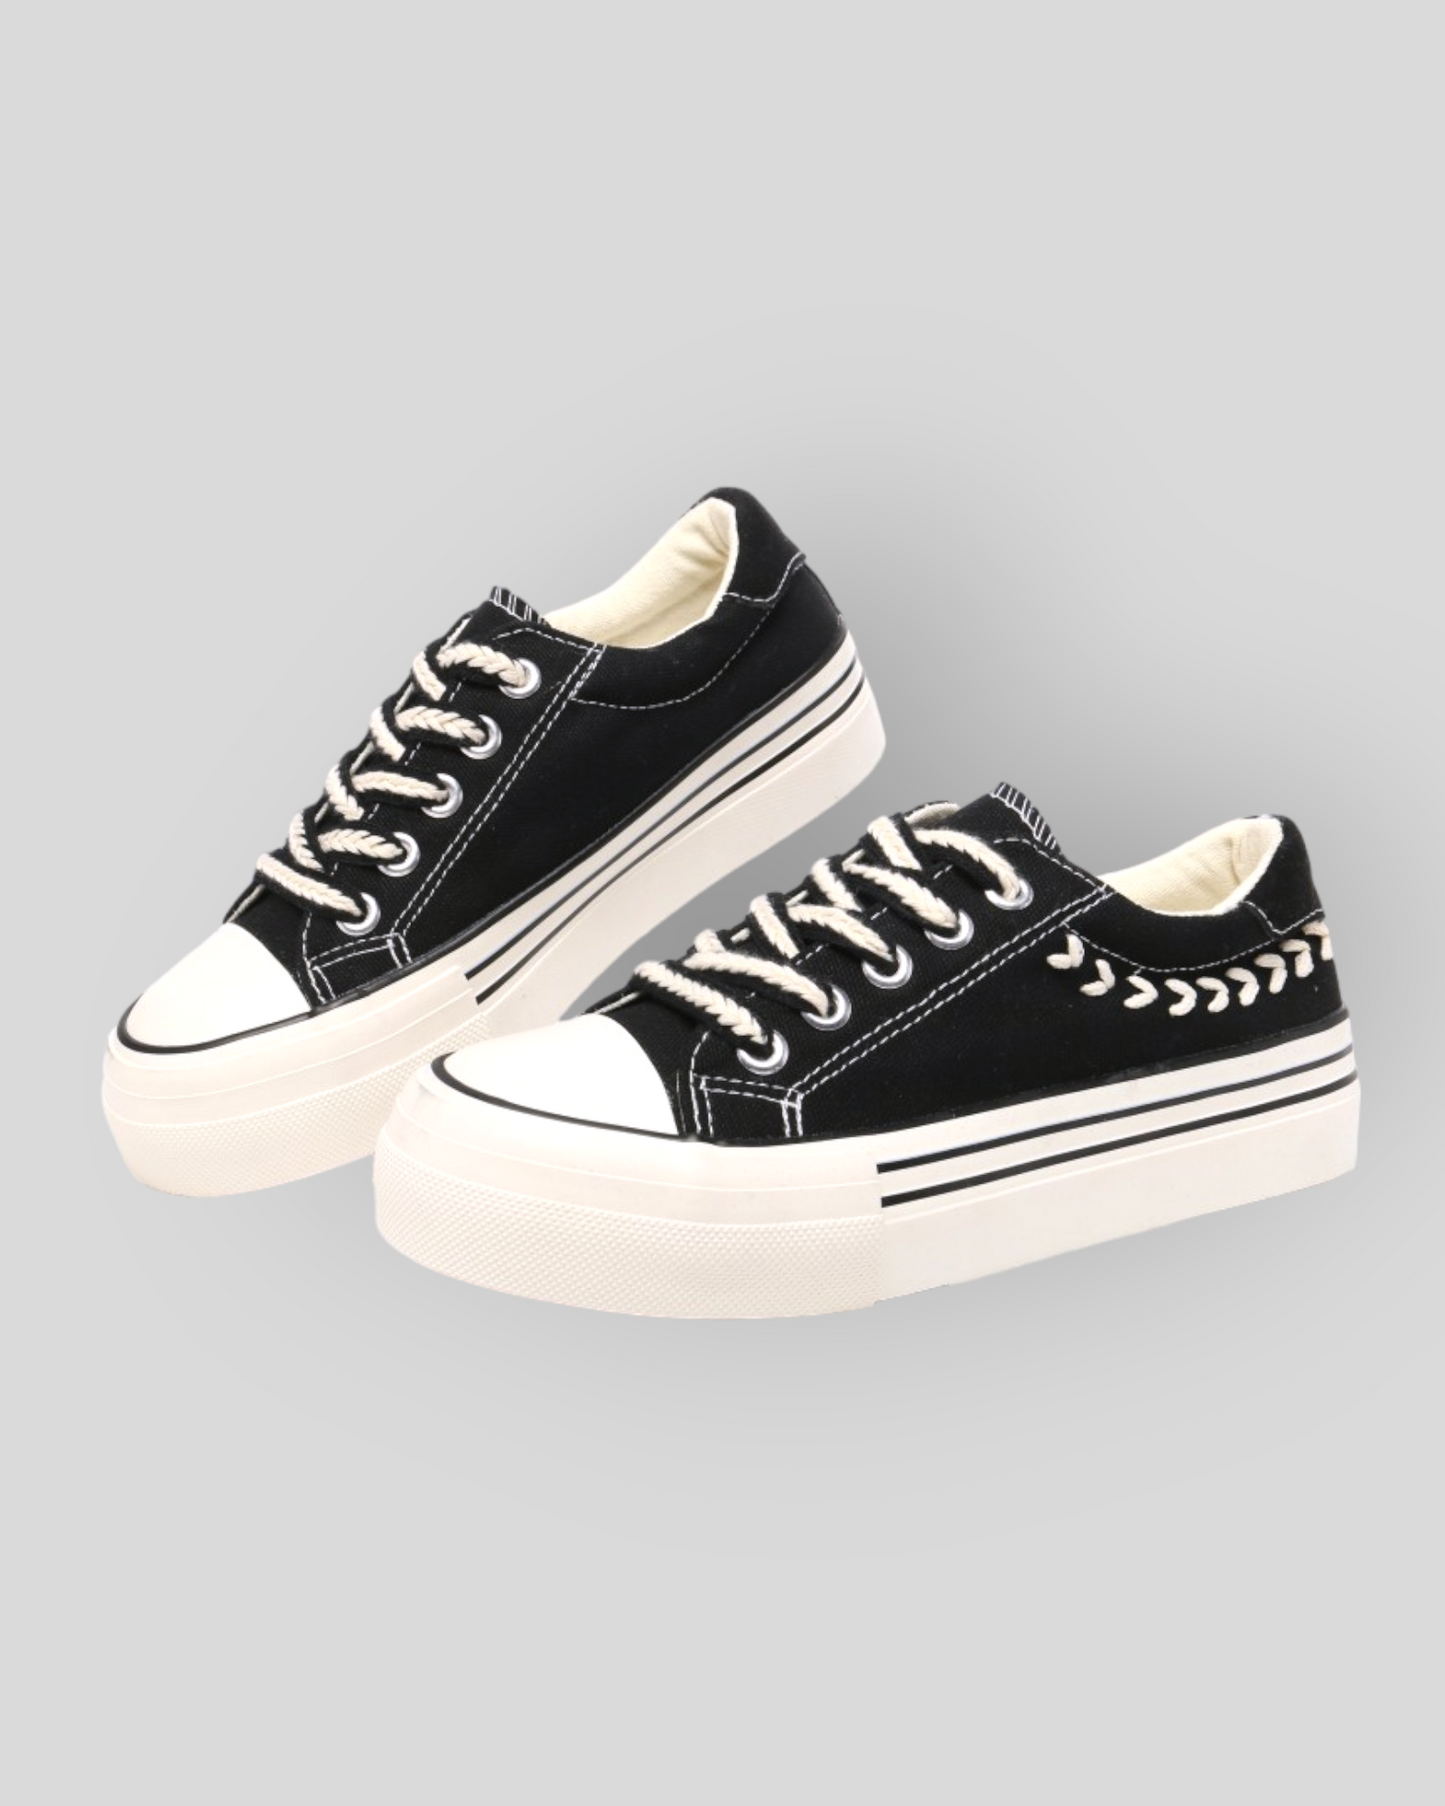 Women's Outdoor Black Canvas Sneakers/ Trainers/ Shoes